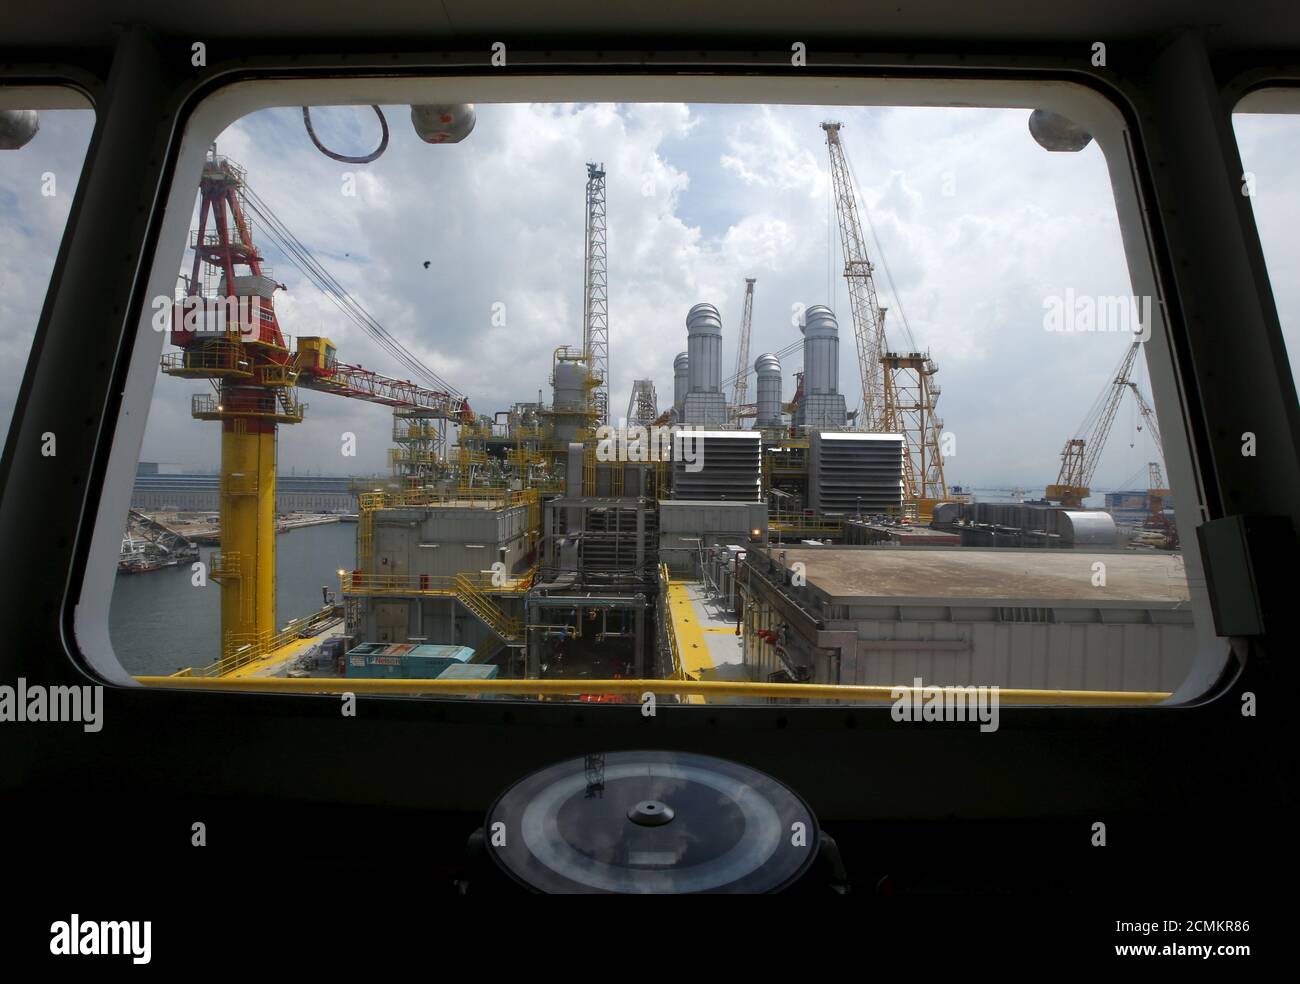 A view onboard Tullow Oil's newly completed Floating Production, Storage and Offloading vessel (FPSO) Prof. John Evans Atta Mills at Sembcorp Marine's Jurong Shipyard in Singapore January 20, 2016. Amid one of the deepest oil price crashes in history, Britain's Tullow Oil is sending one of the world's biggest floating deep-water oil production platforms to West Africa to pump crude for at least 20 years. Picture taken January 20, 2016.   REUTERS/Edgar Su Stock Photo